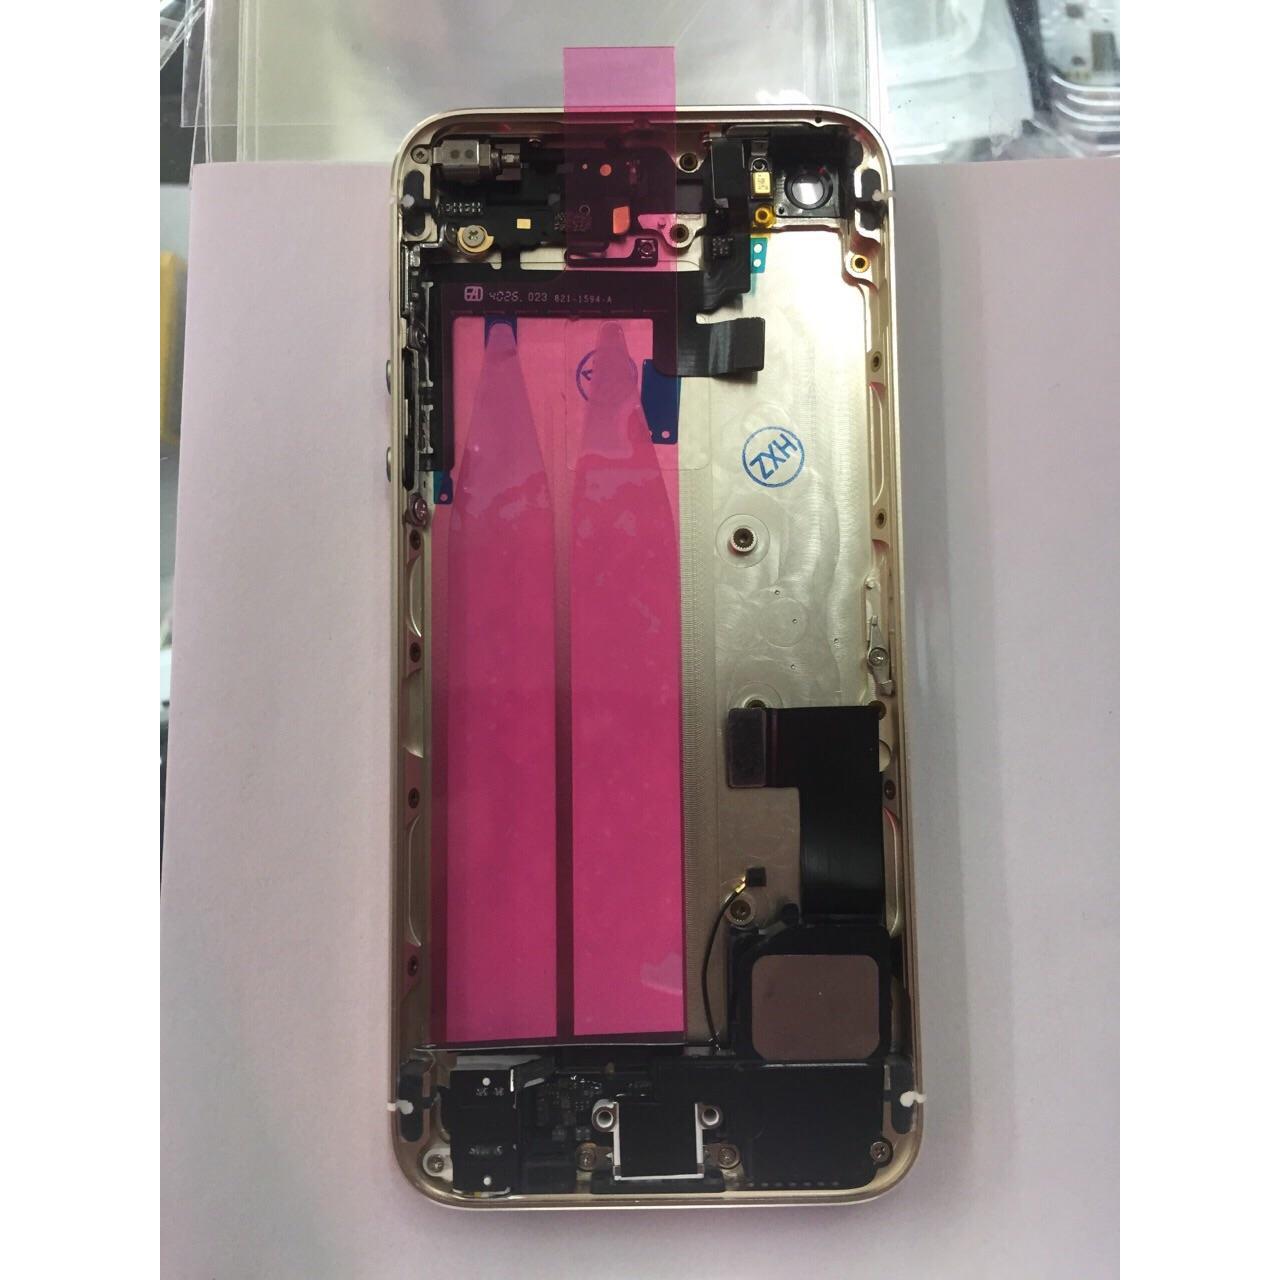 Apple Iphone 5G Wholesale Suppliers